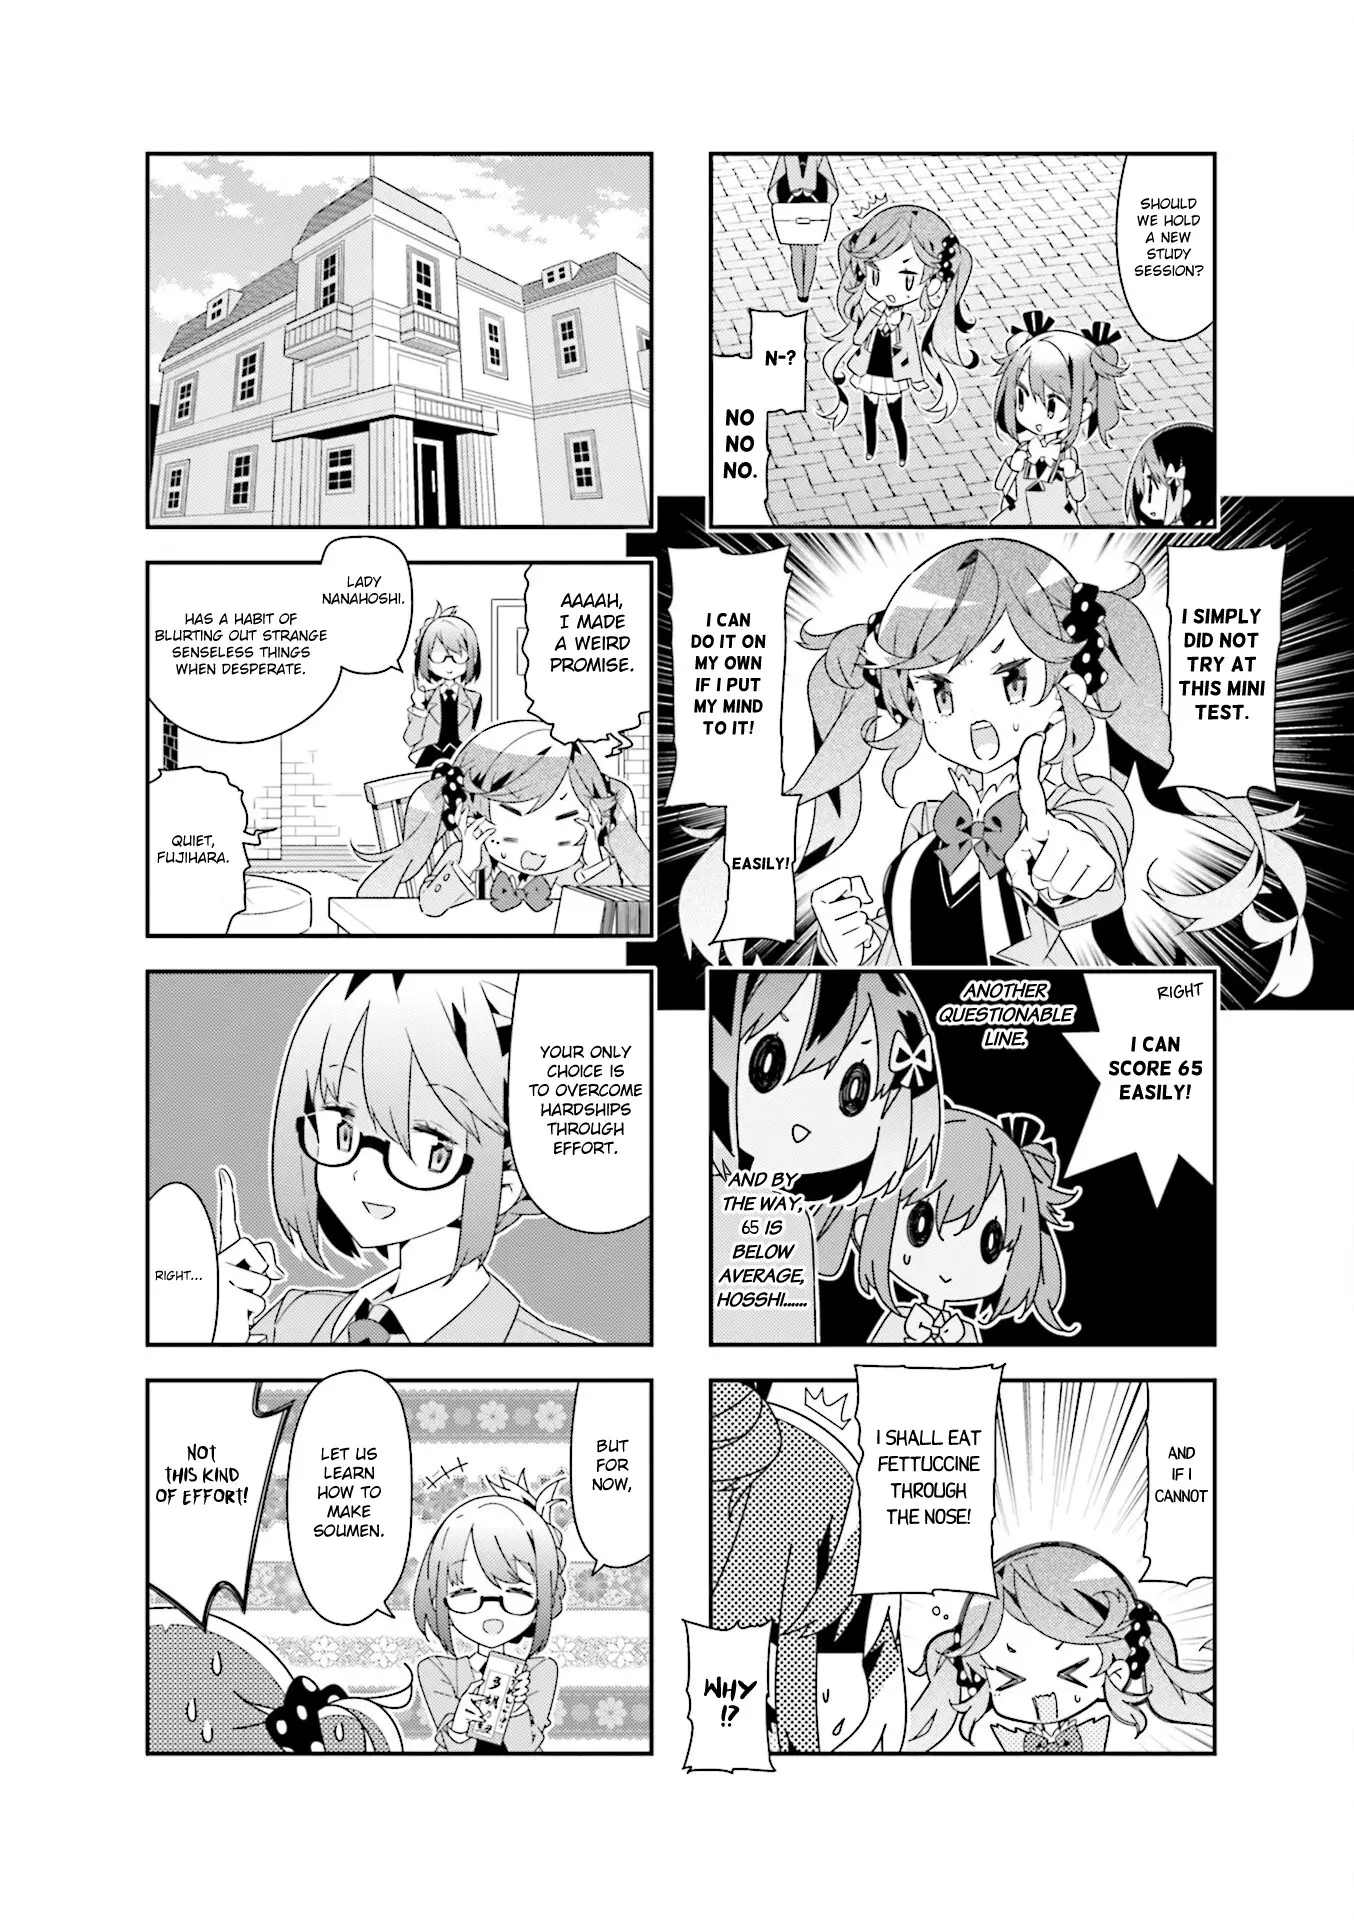 The Life After Retirement Of Magical Girls - 27 page 2-28cf75a2